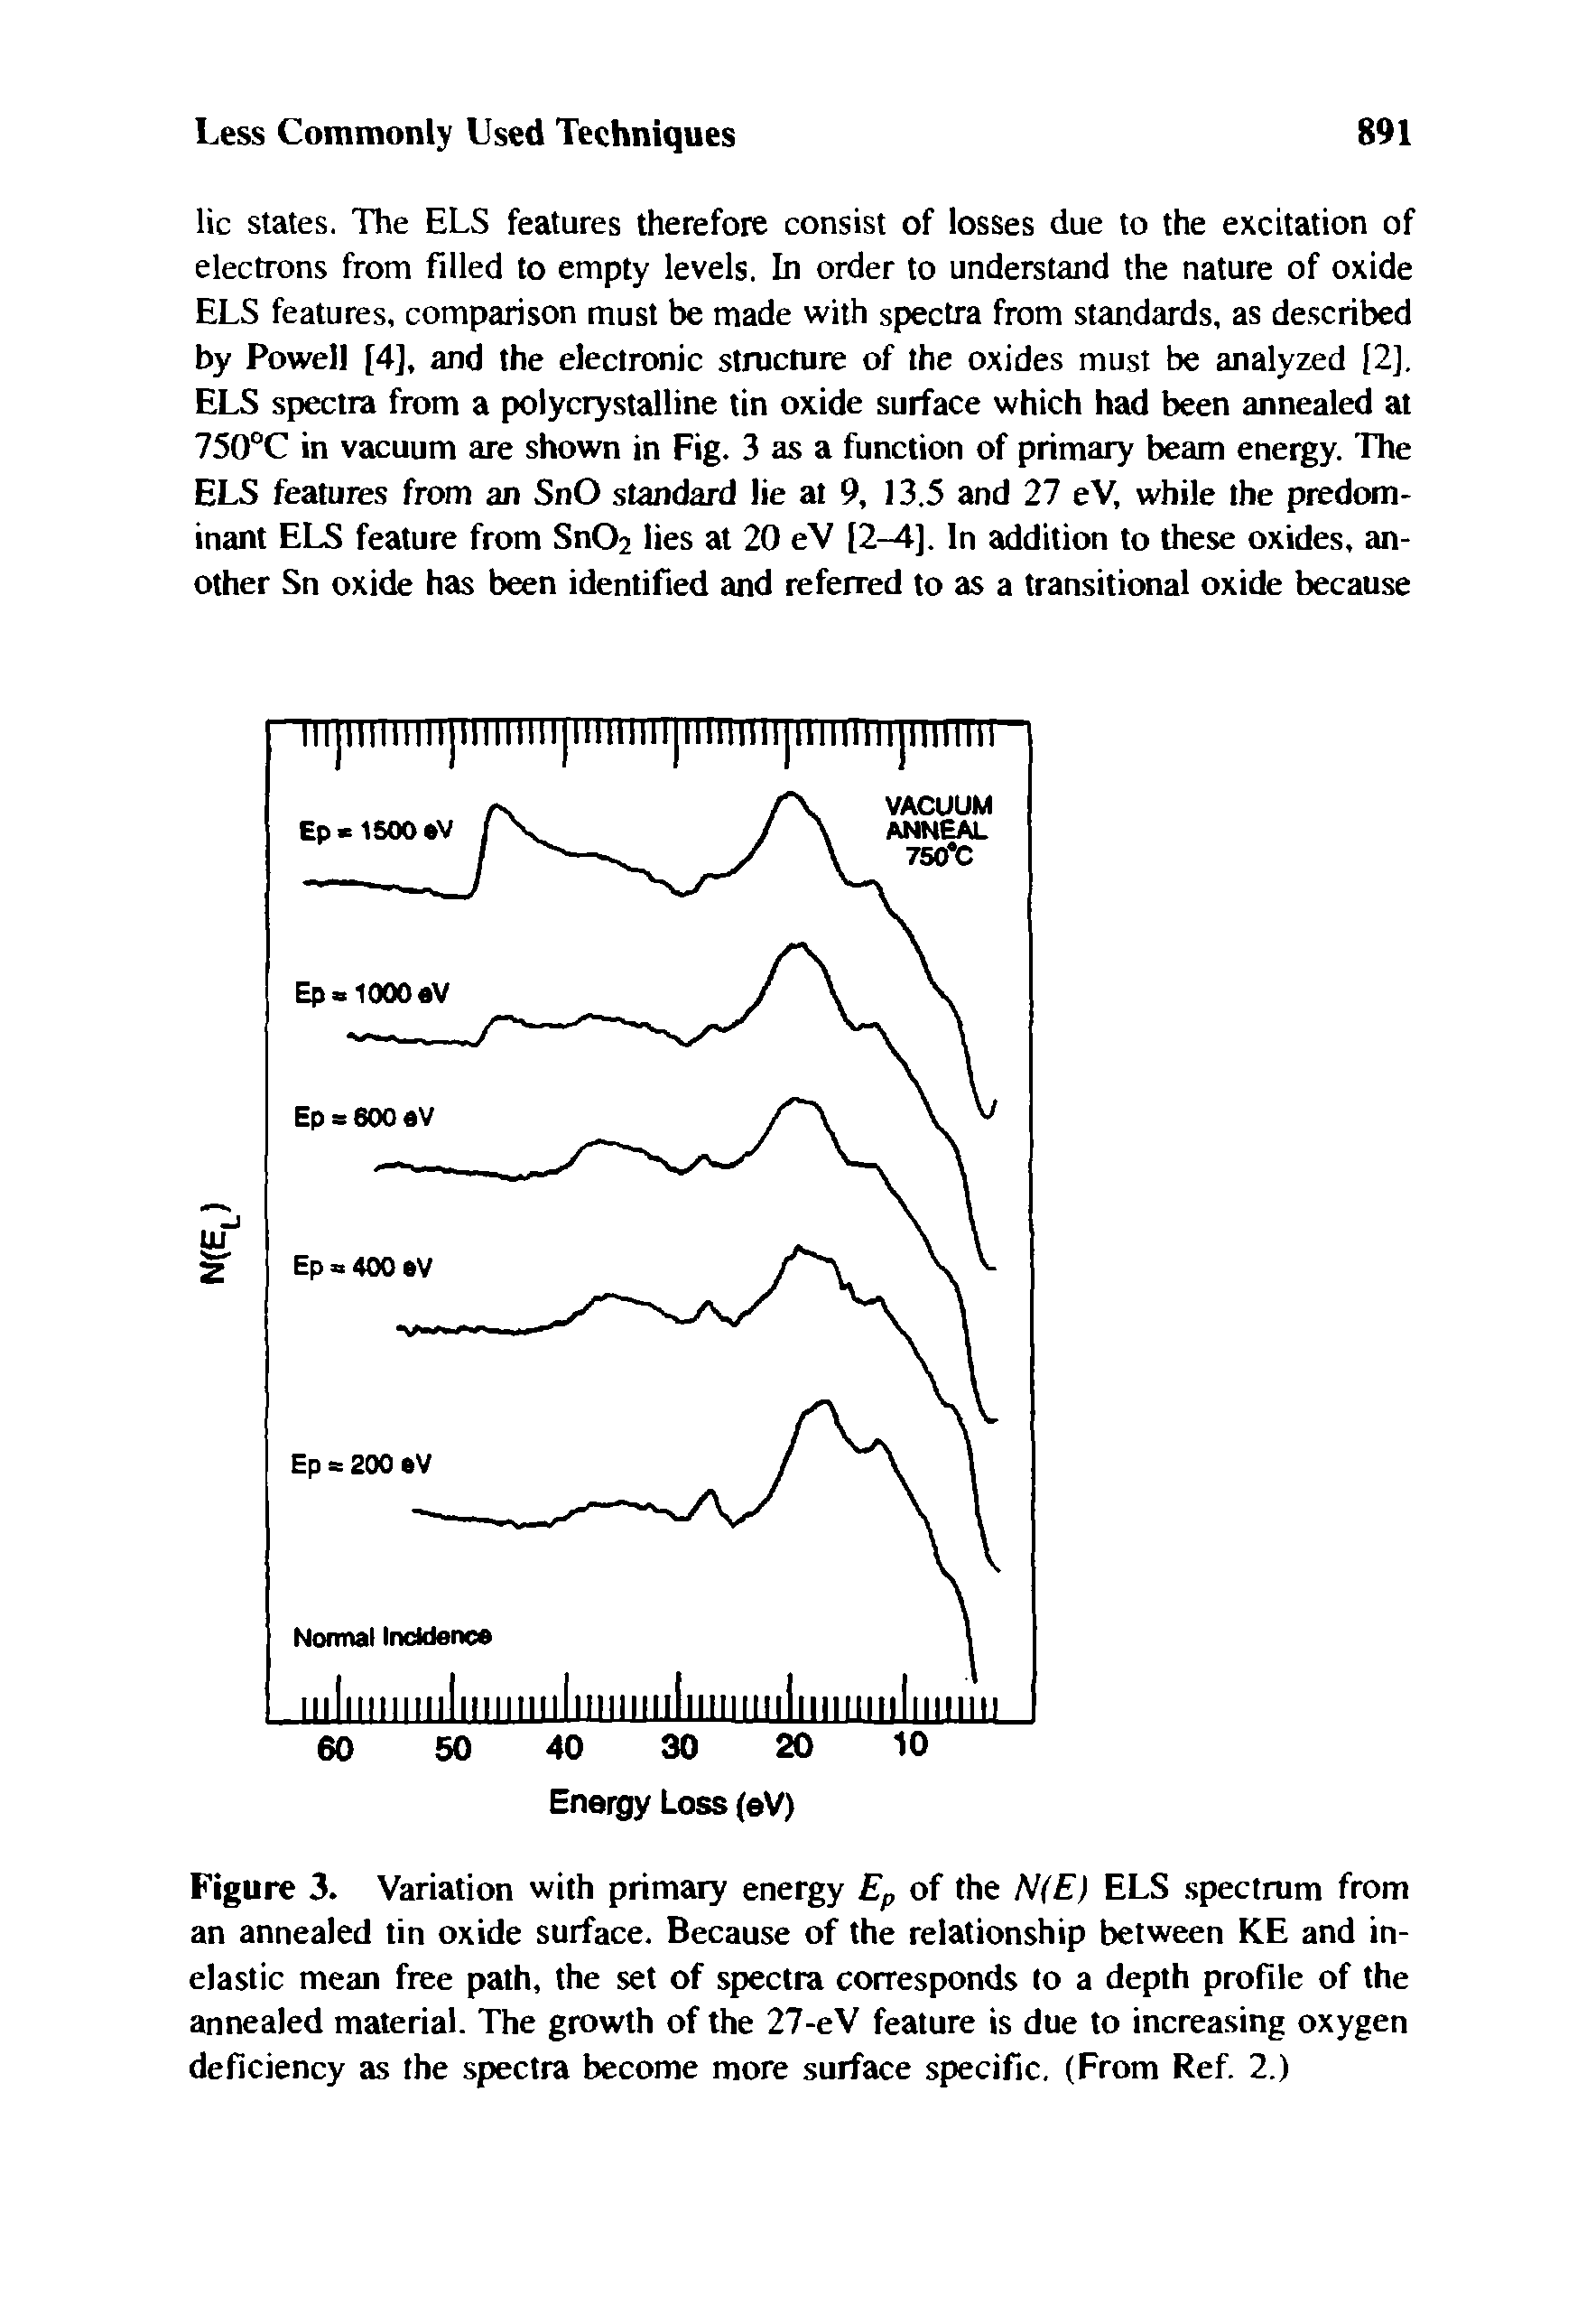 Figure 3. Variation with primary energy Ep of the N(E ELS spectrum from an annealed tin oxide surface. Because of the relationship between KE and inelastic mean free path, the set of spectra corresponds to a depth profile of the annealed material. The growth of the 27-eV feature is due to increasing oxygen deficiency as the spectra become more surface specific. (From Ref. 2.)...